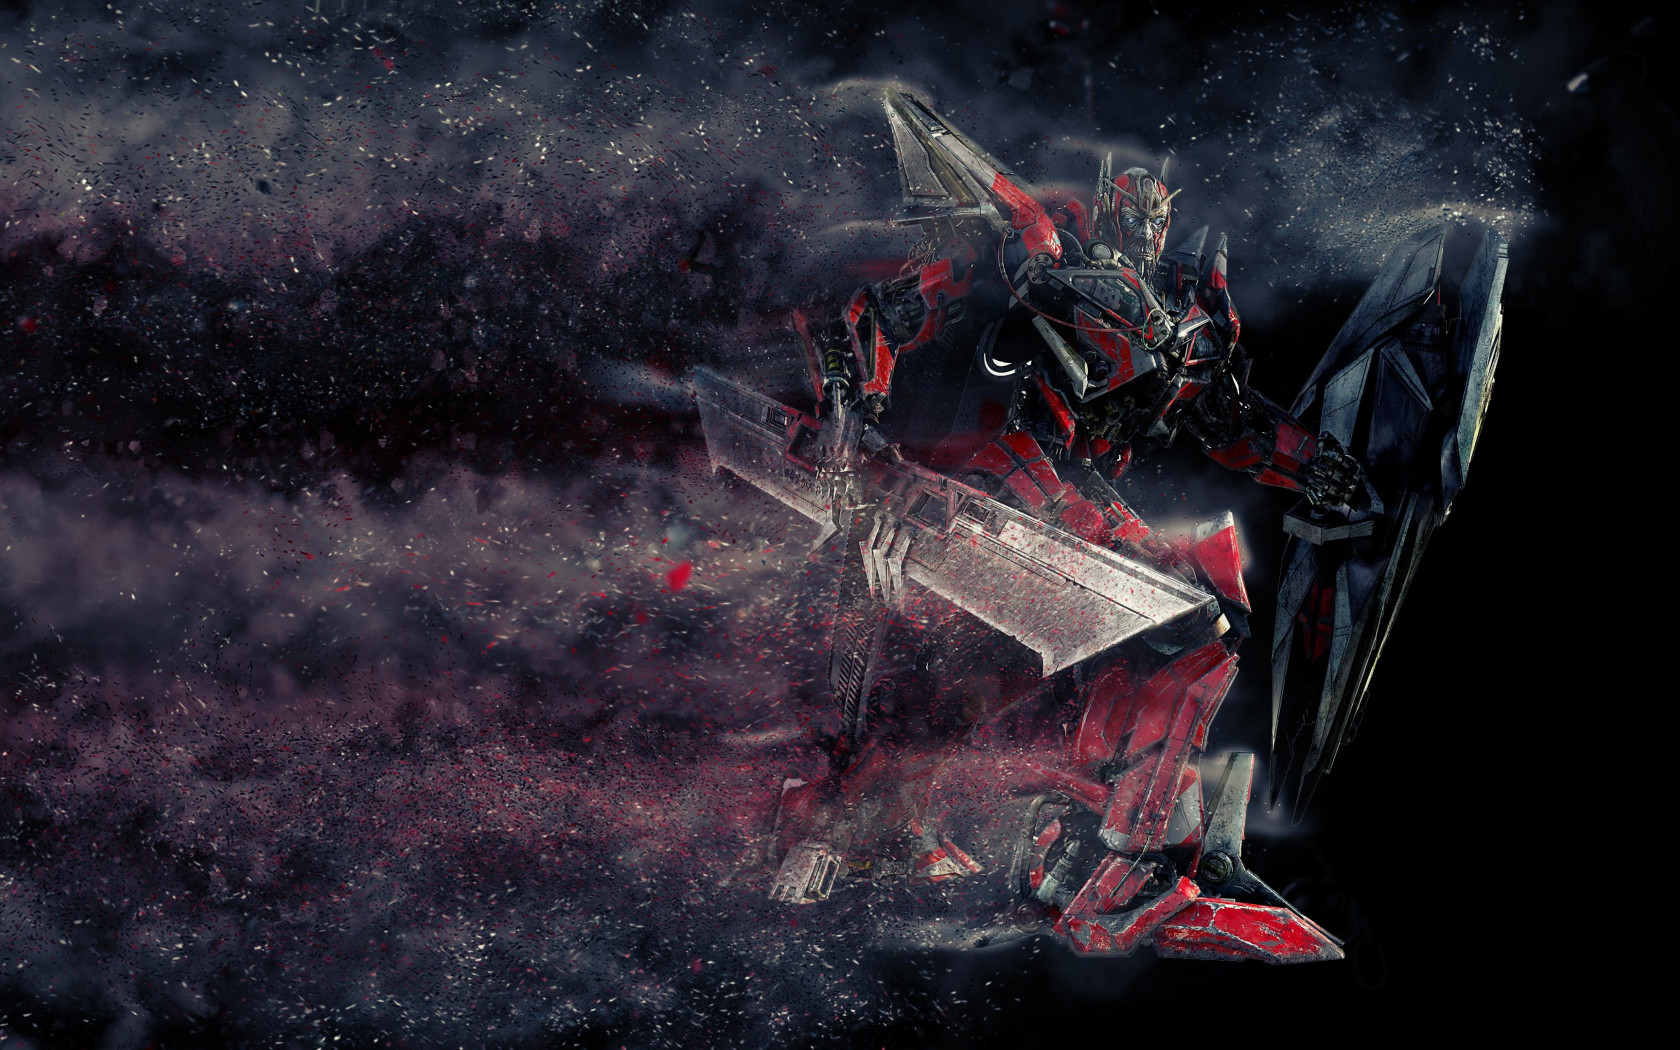 Sentinel Prime from Transformers wallpaper 1680x1050